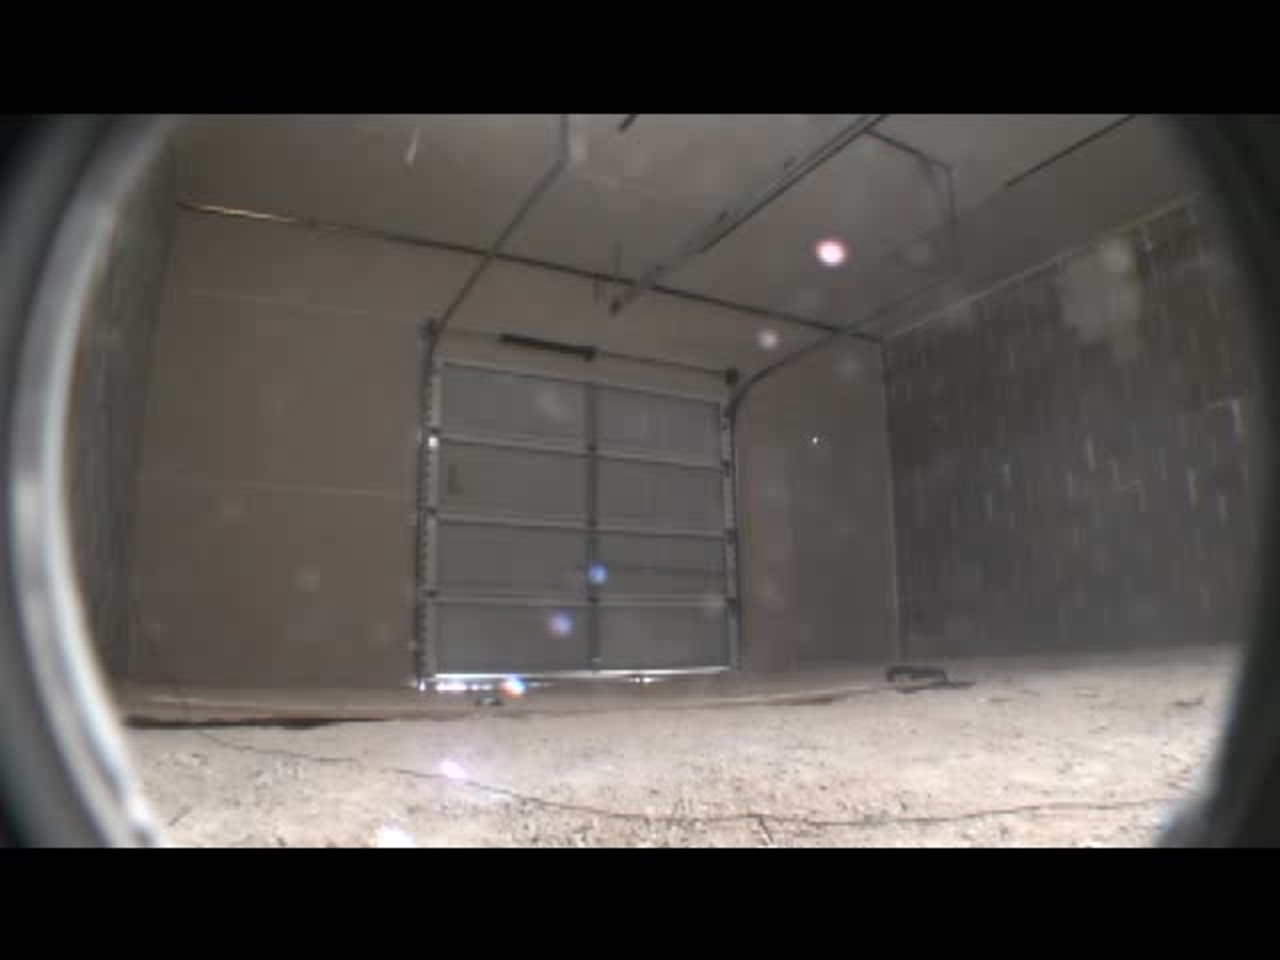 Test 3: Dispersion and Burning Behavior of Hydrogen Released in a Full-Scale Residential Garage in the Presence and Absence of Conventional Automobiles (View of garage interior from floor camera)